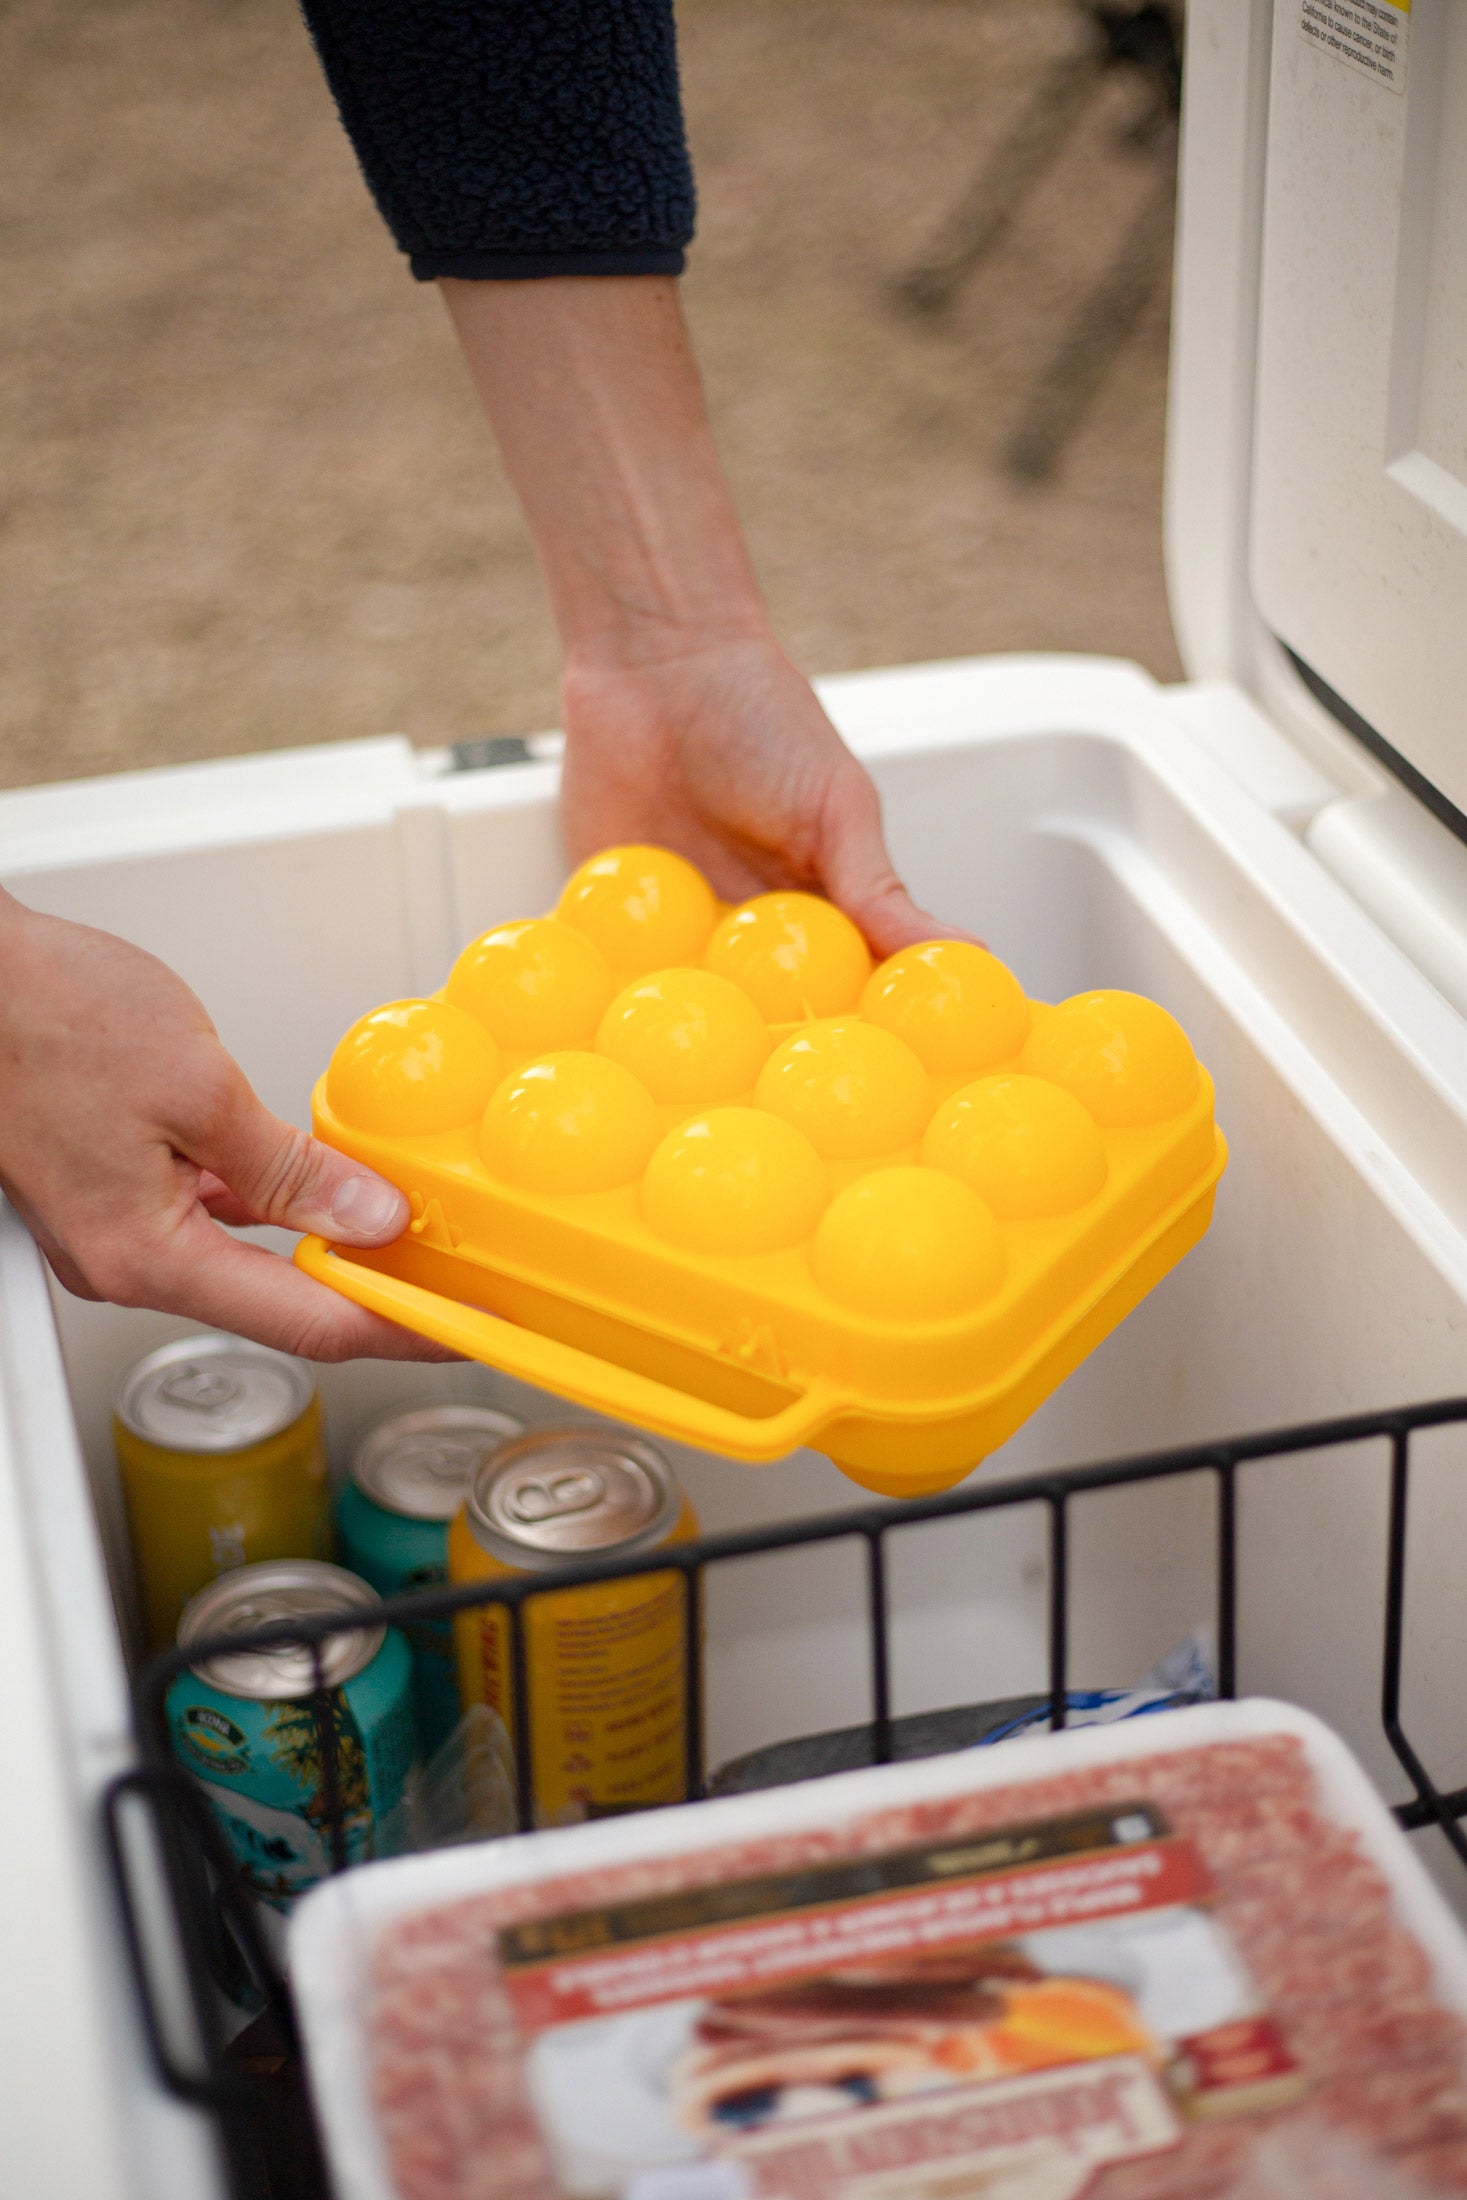 Hands reaching for an Egg Holder out of a cooler.